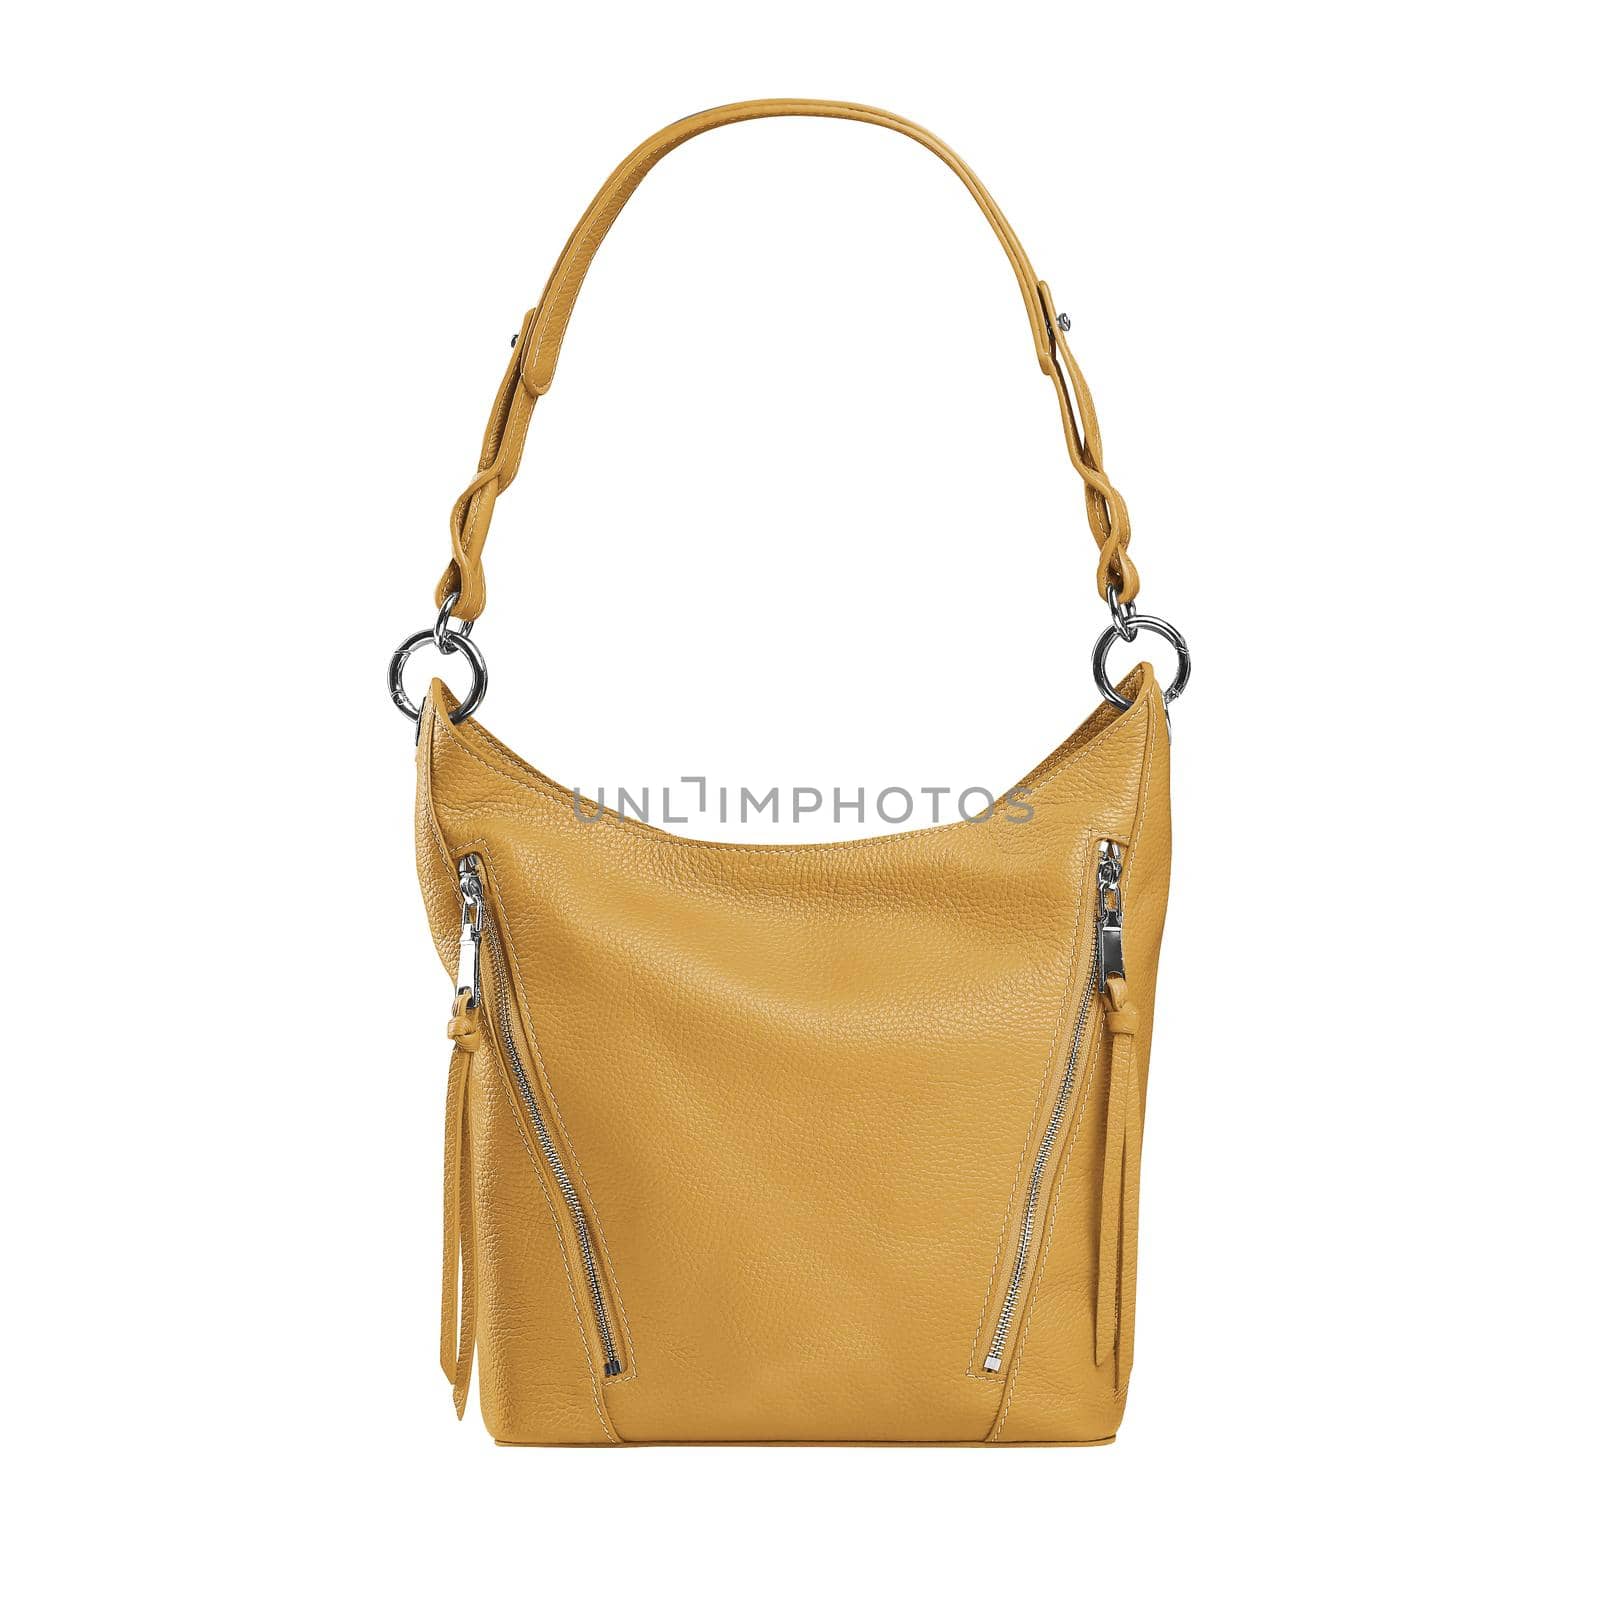 Elegant middle size yellow handbag made of genuine leather with long strap isolated on white background. Fashion accessories for ladies